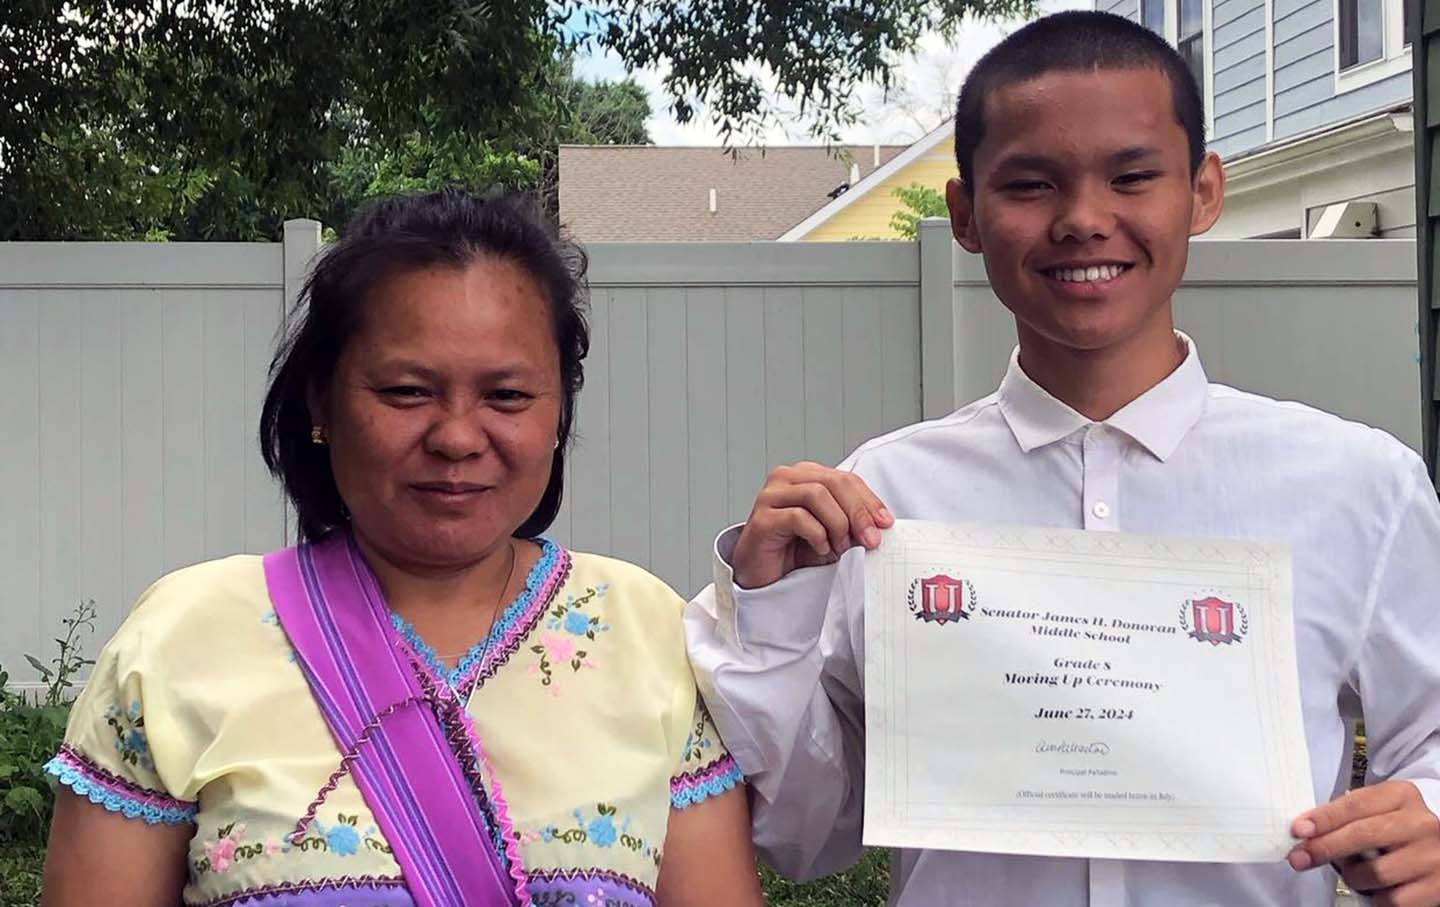 Nyah Mway and his mother, Chee War, celebrate Mway's graduation from middle school on June 27, 2024, the day before Utica police killed him.